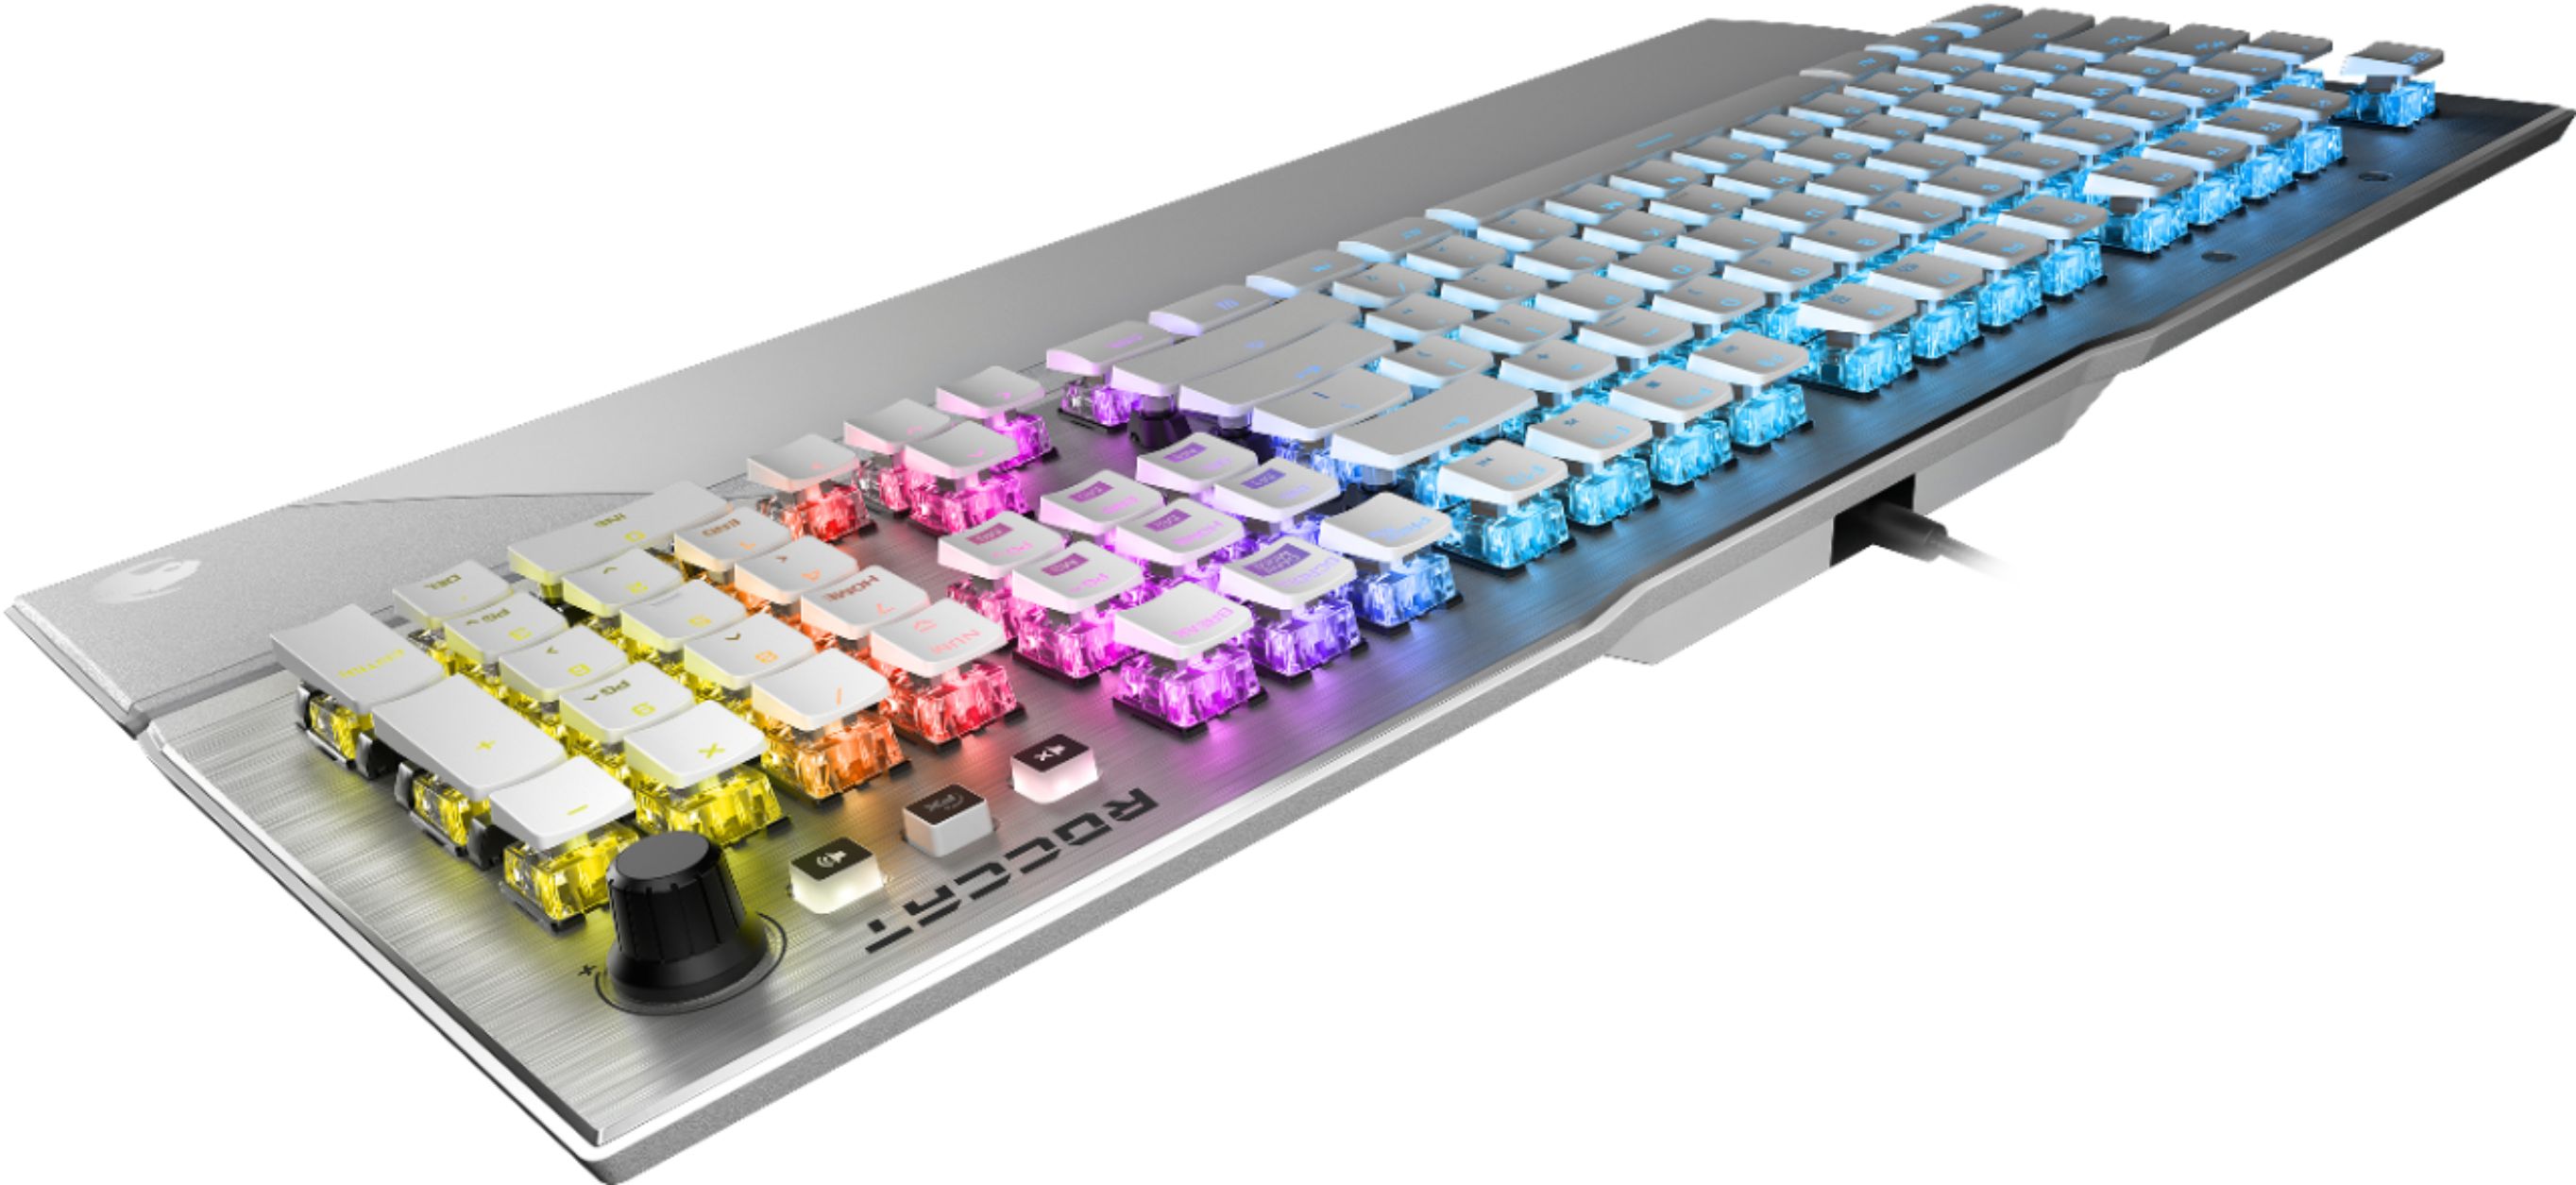 Roccat Vulcan 122 Full Size Mechanical Pc Gaming Keyboard With Tactile Titan Switch Aimo Rgb Lighting And Detachable Palm Rest Arctic White Roc 12 941 Bn Best Buy